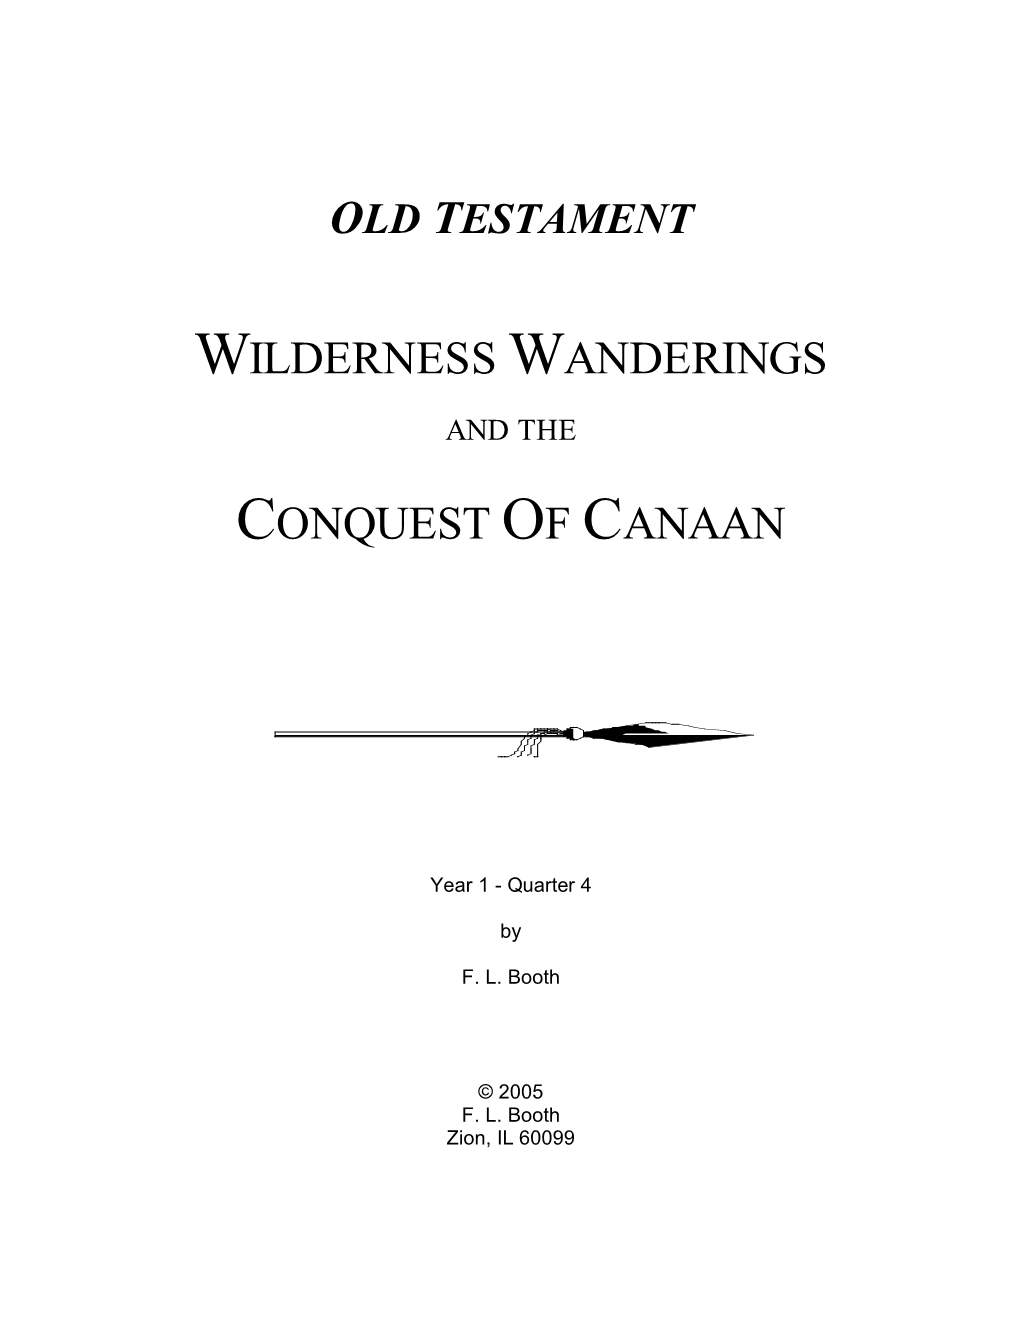 Wilderness Wanderings and Conquest of Canaan